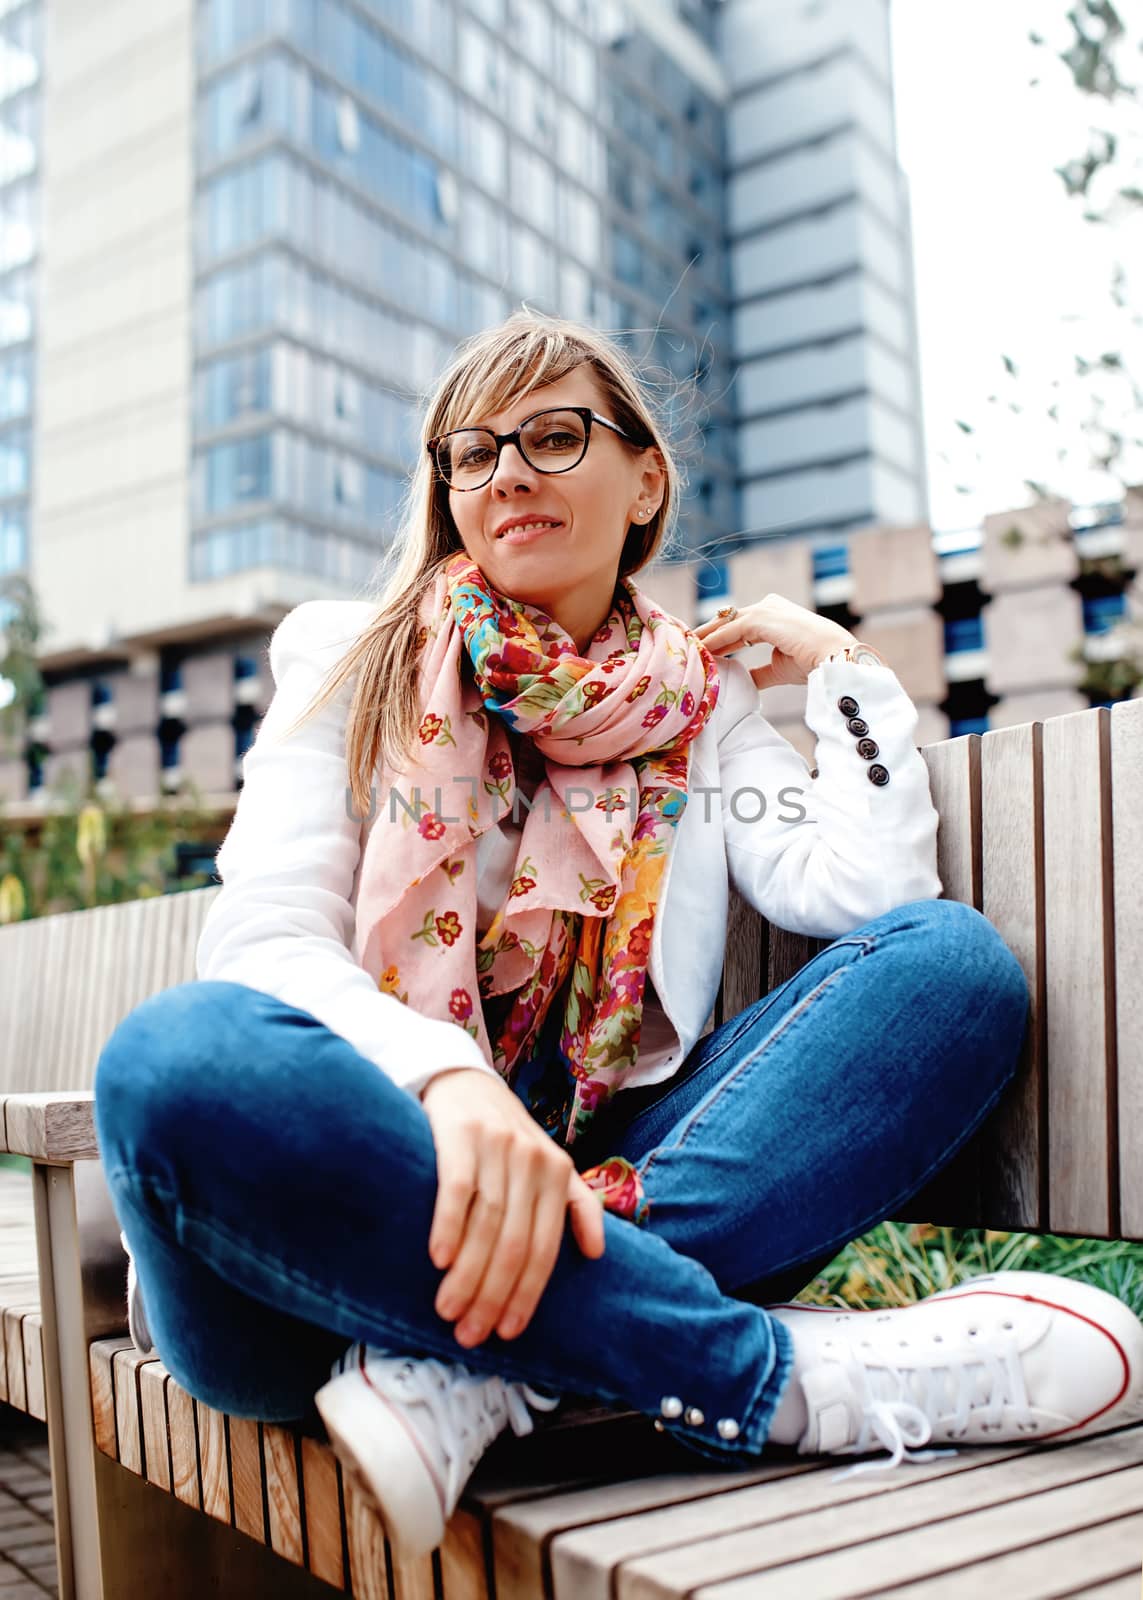 woman sitting on bench in city centre against skyscraper